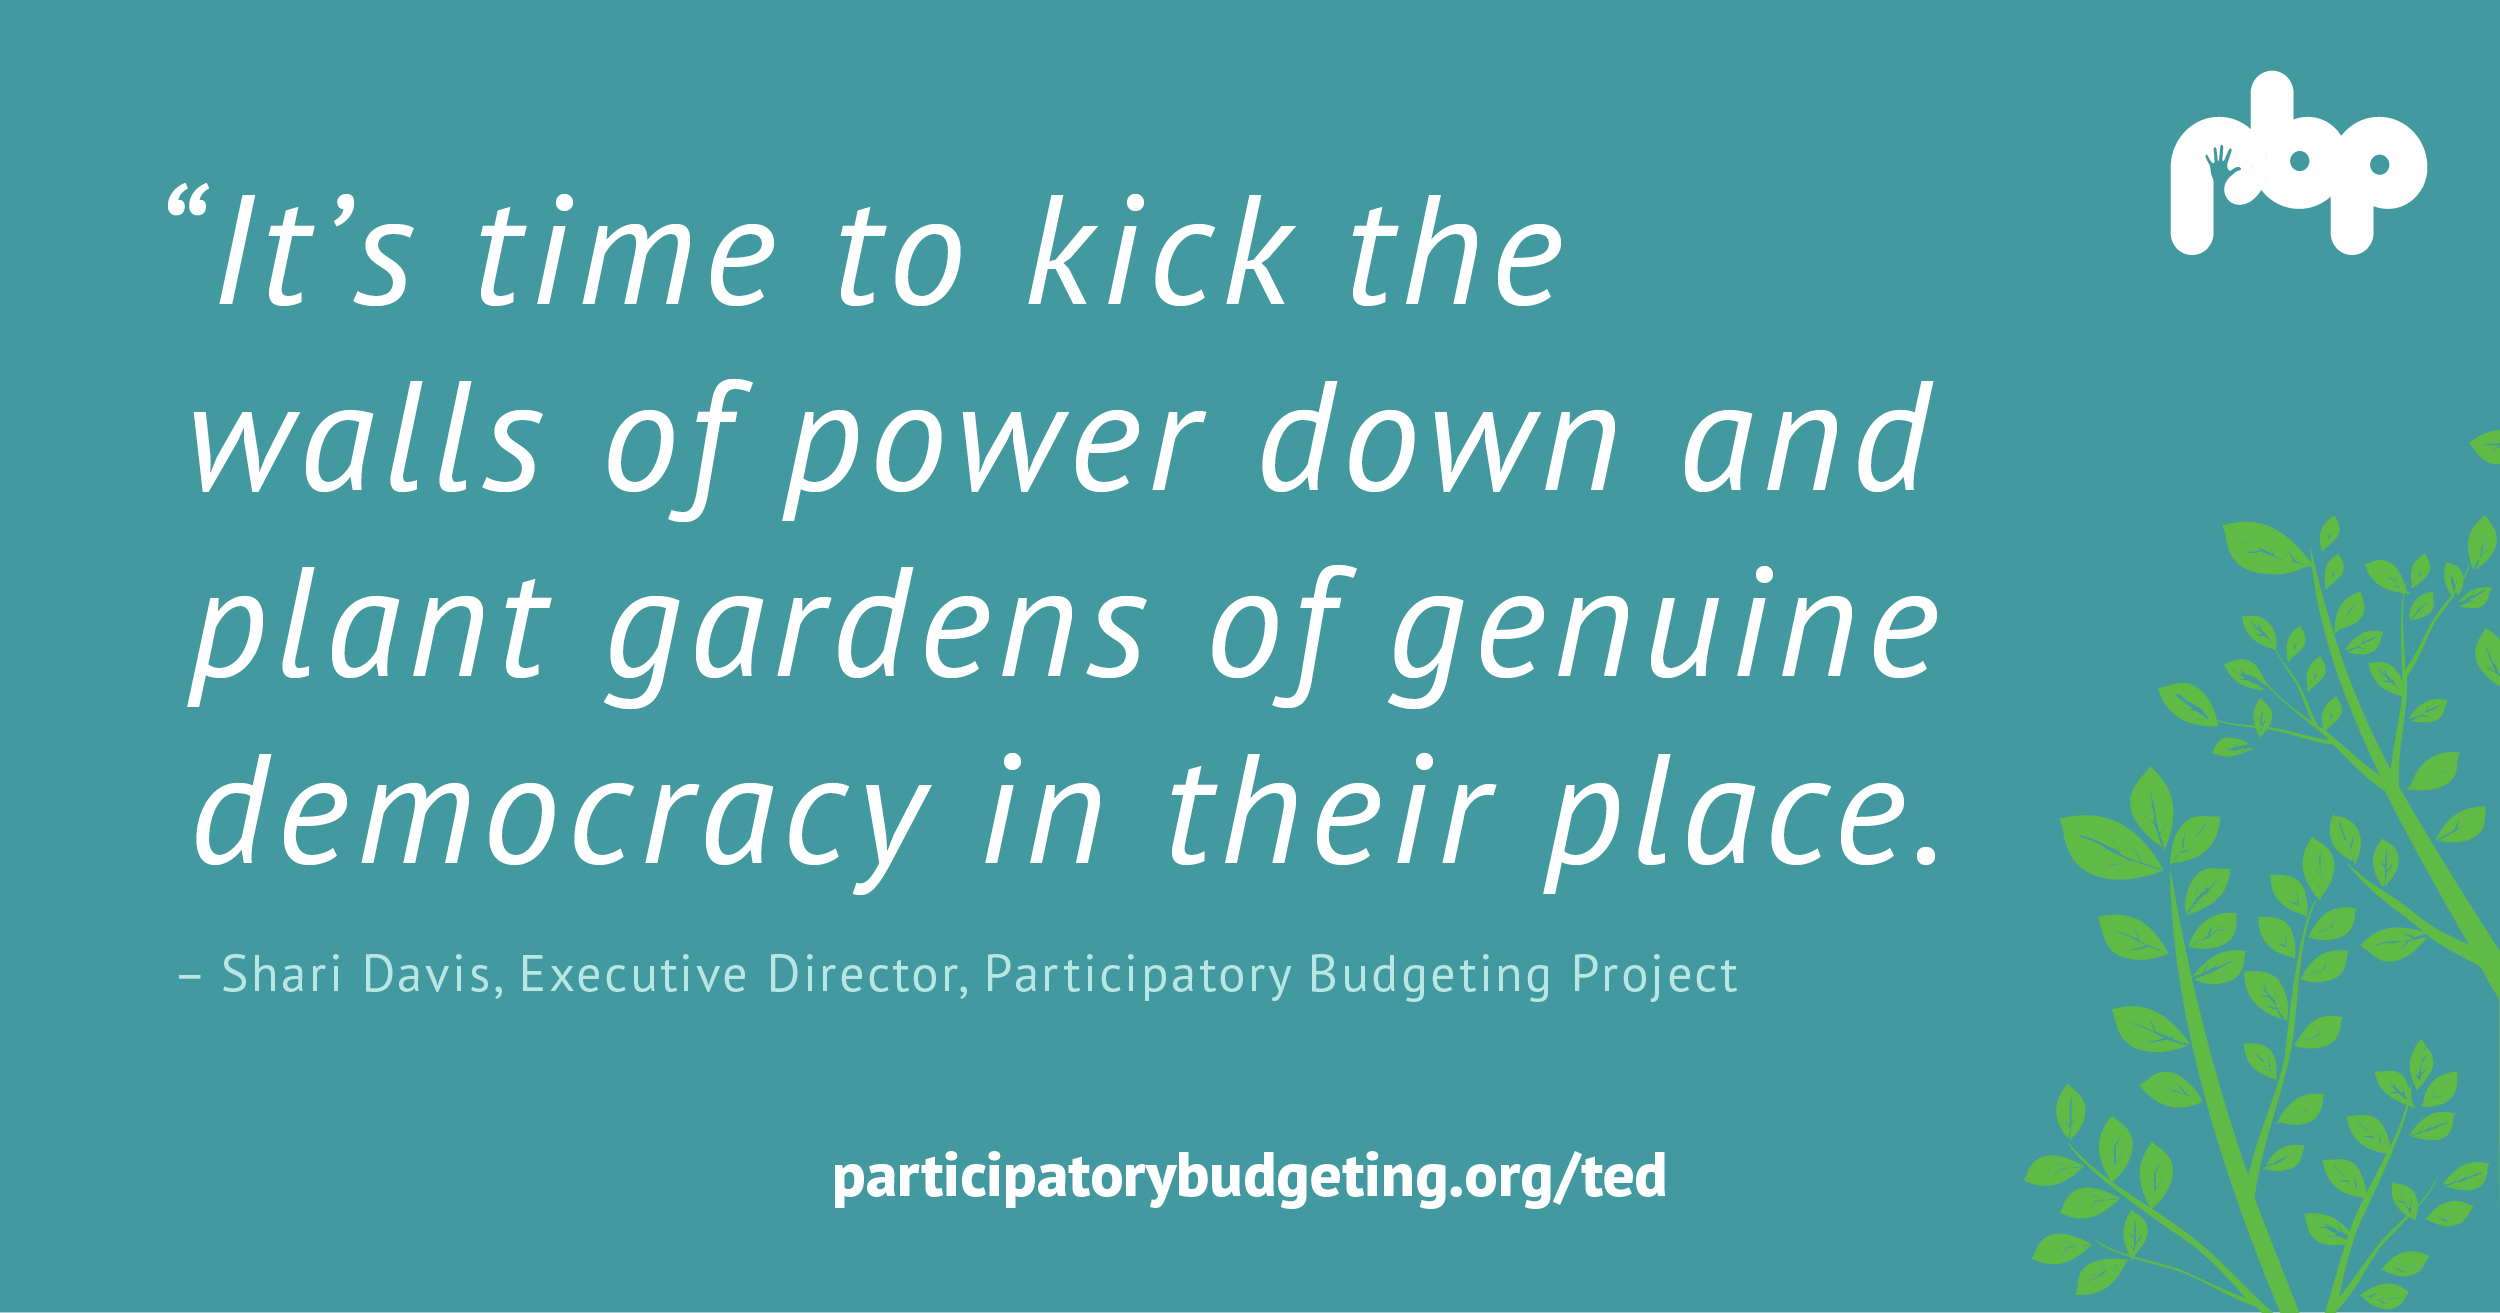 It's time to kick the walls of power down and plant gardens of genuine democracy in their place. - Shari Davis